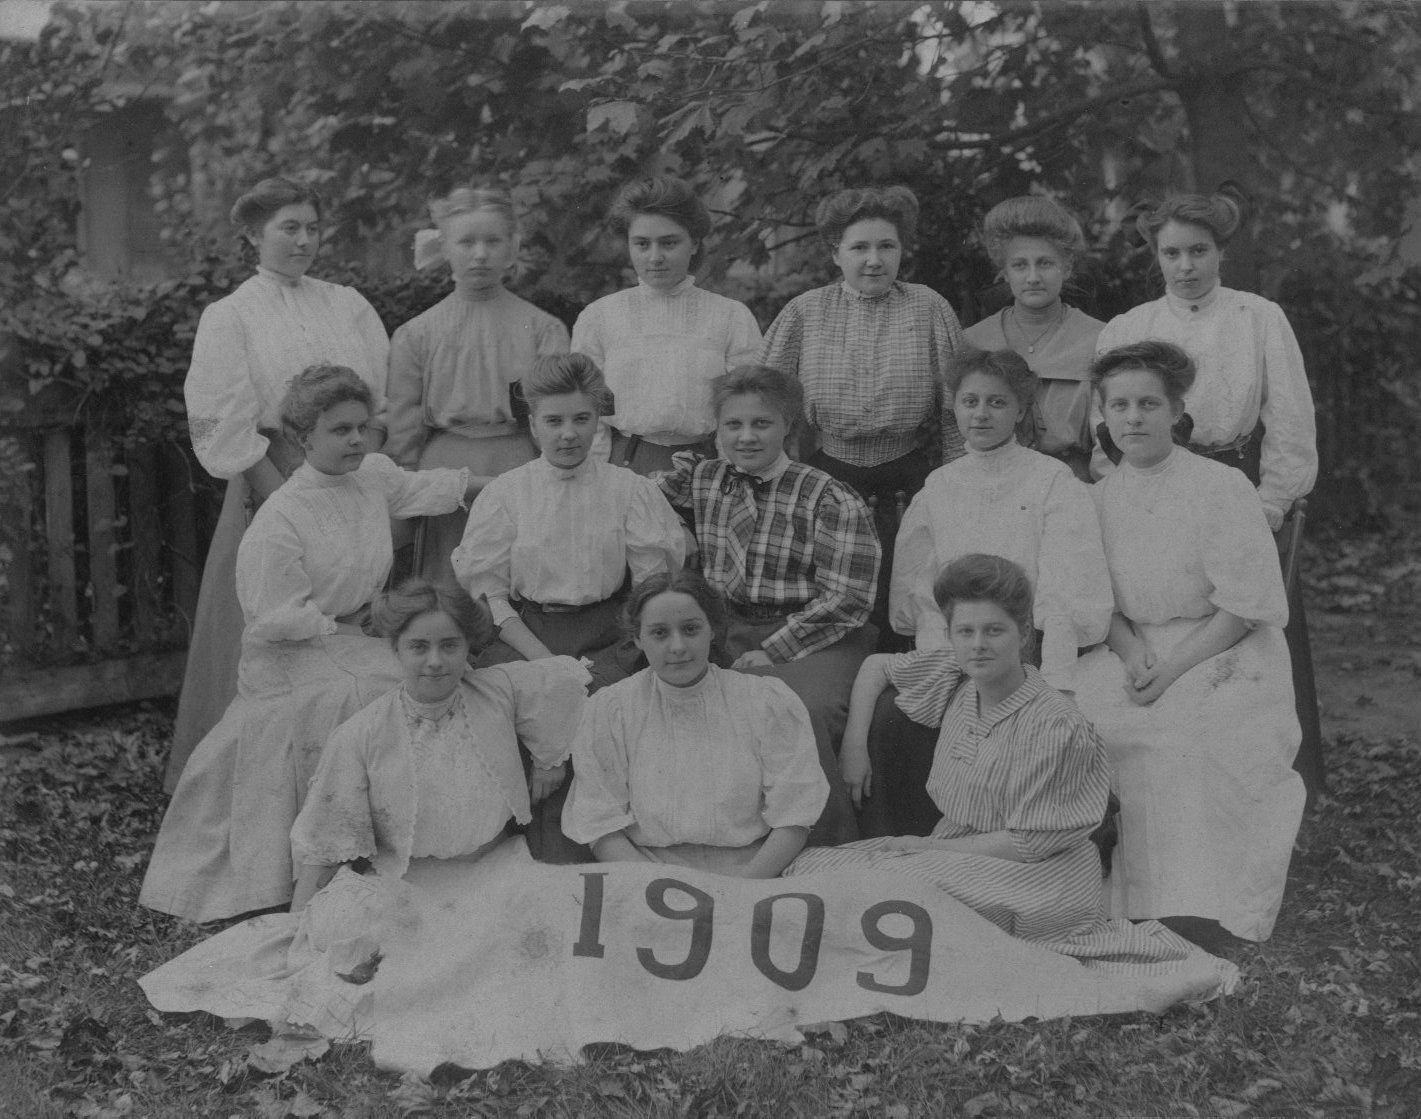 Image of a group photograph of class at Irving College in Mechanicsburg, 1909